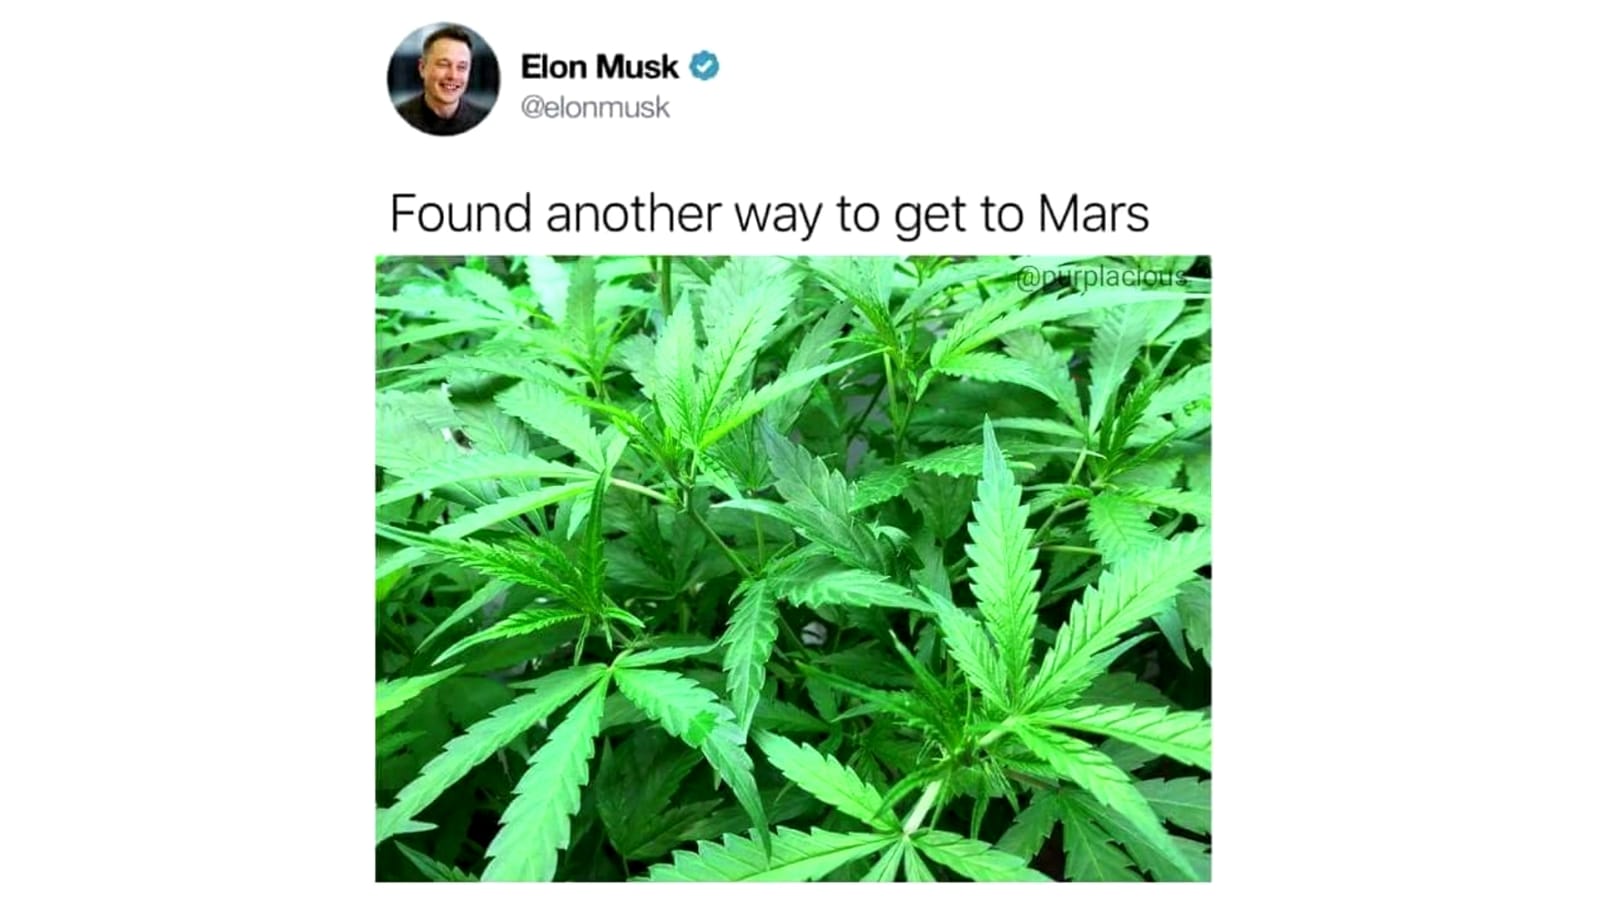 weed meme- elon musk weed memes - Elon Musk Elon Muske Found another way to get to Mars